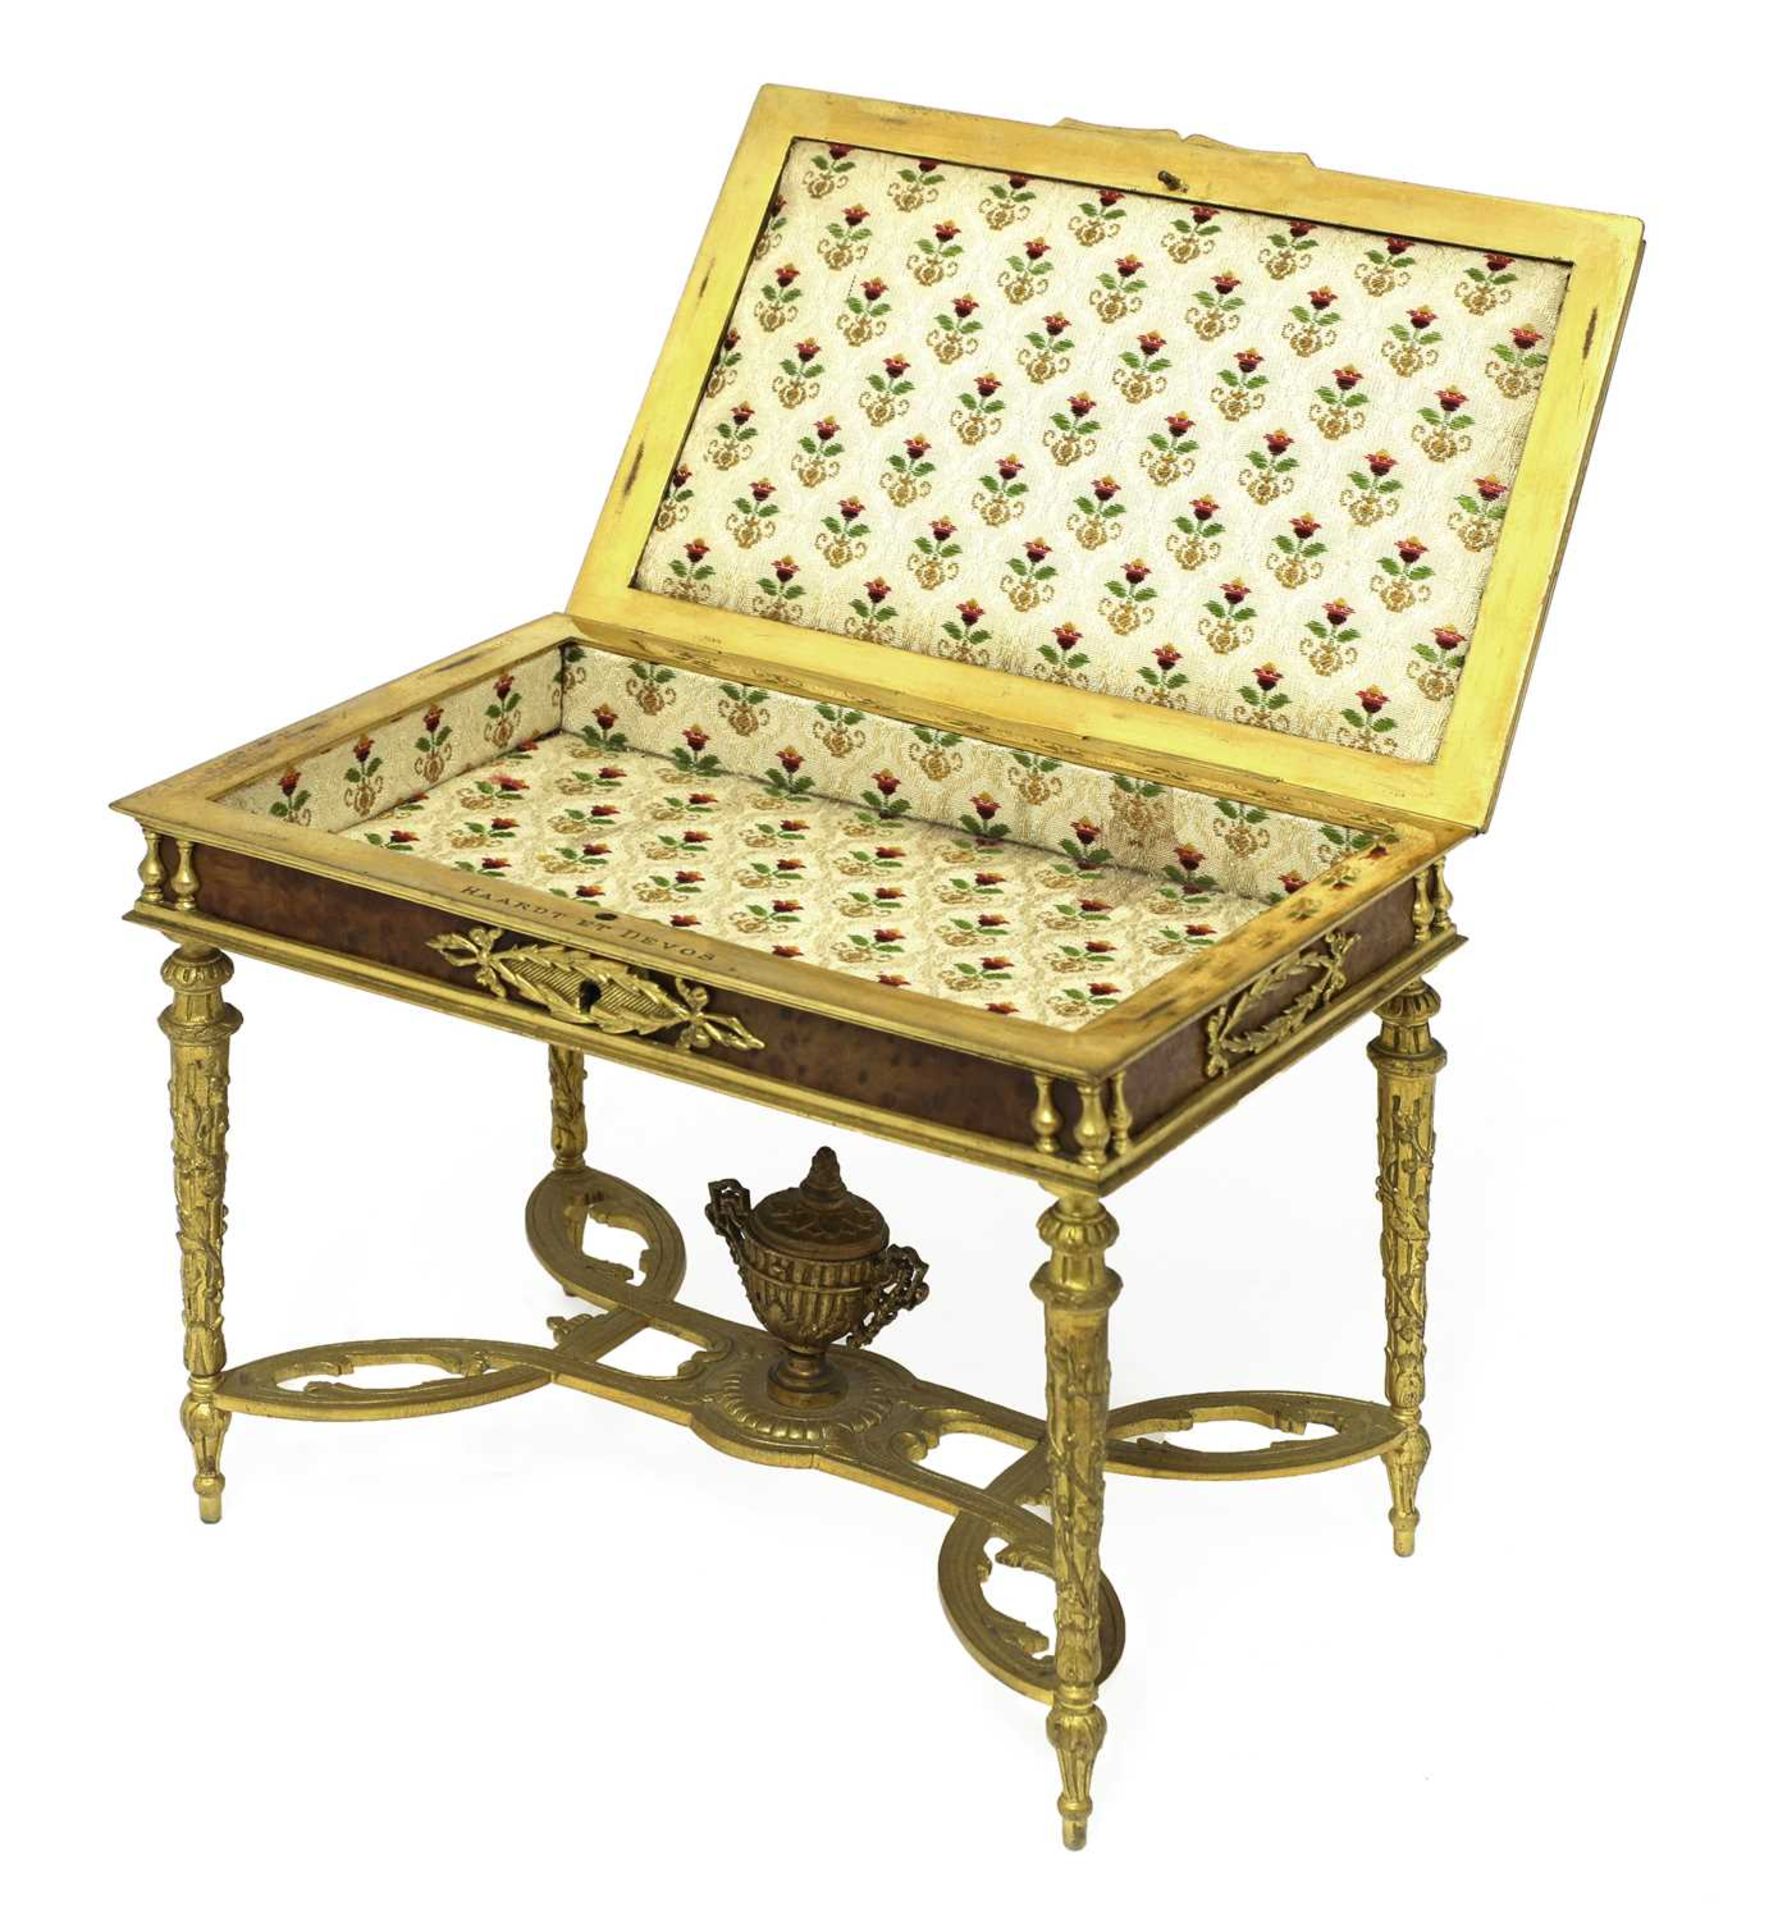 A rare jewellery box by Haardt et Davos, - Image 3 of 9